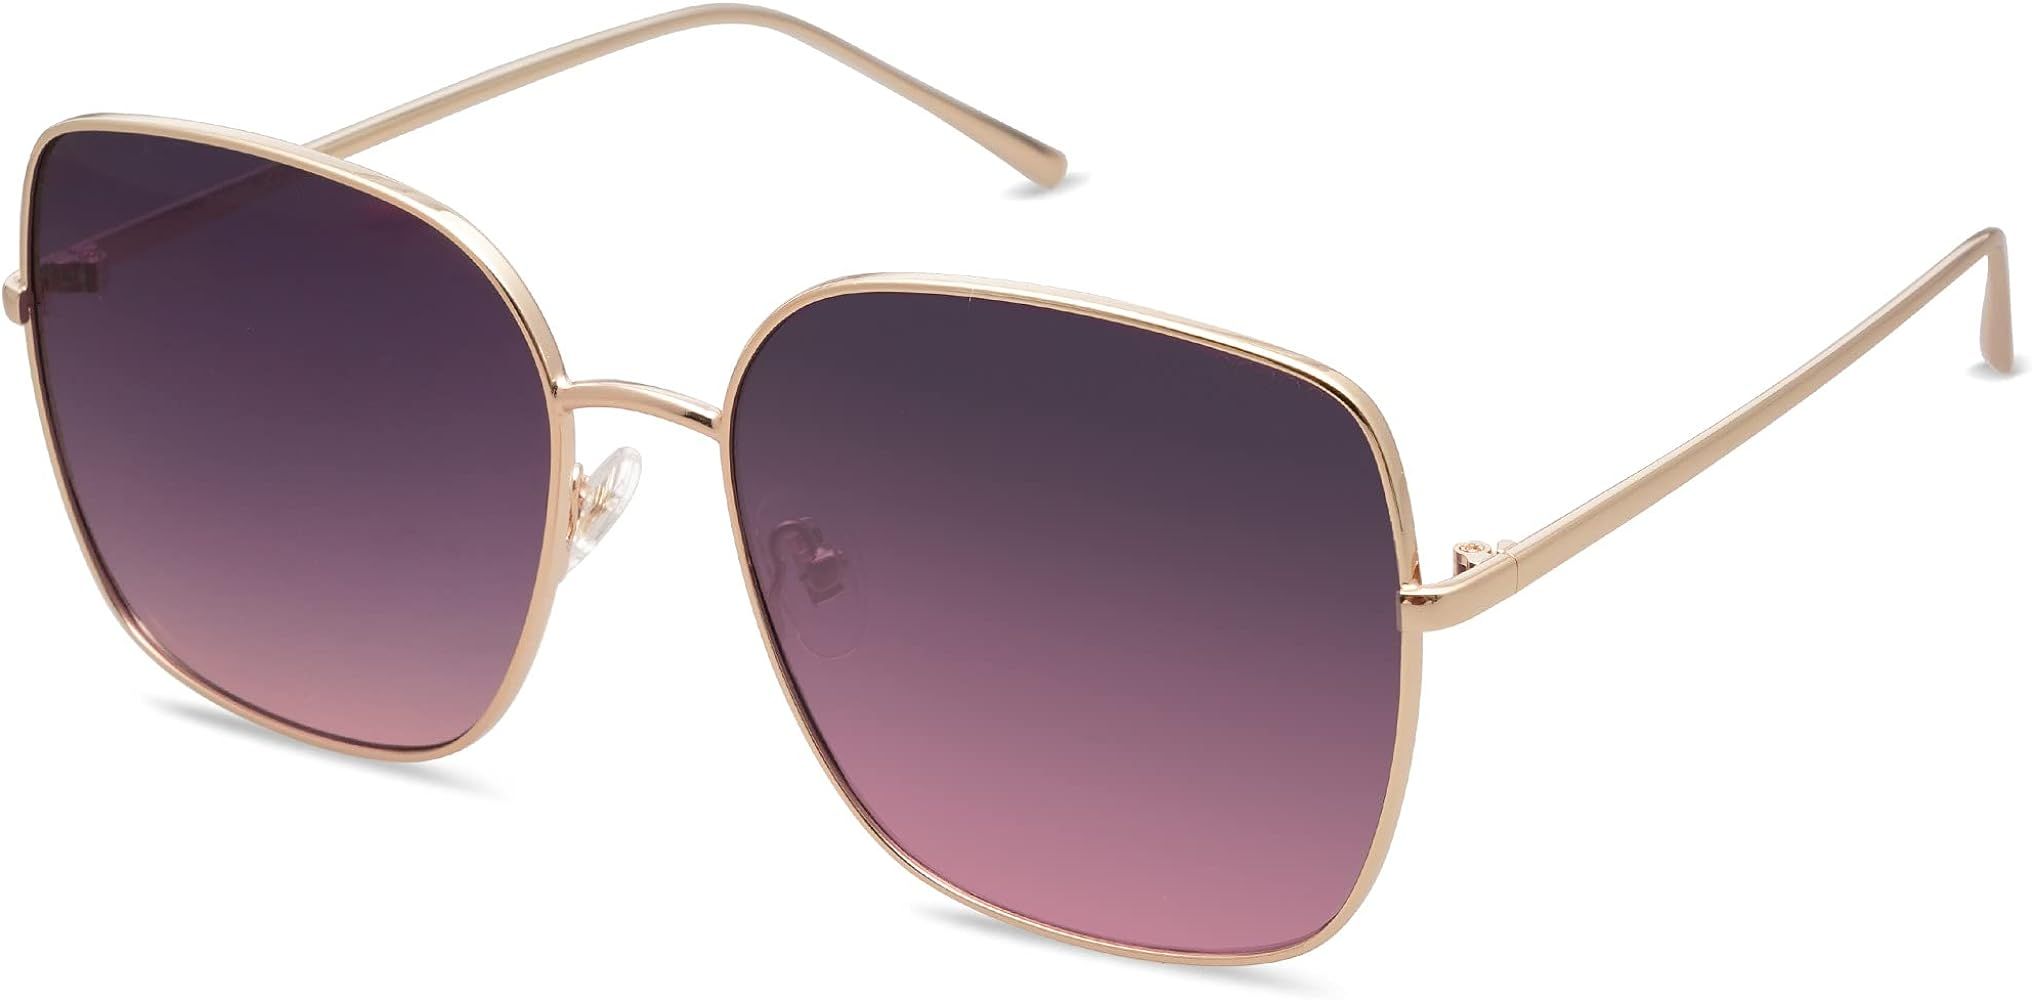 for "sojos trendy oversized square sunglasses for women" | Amazon (US)